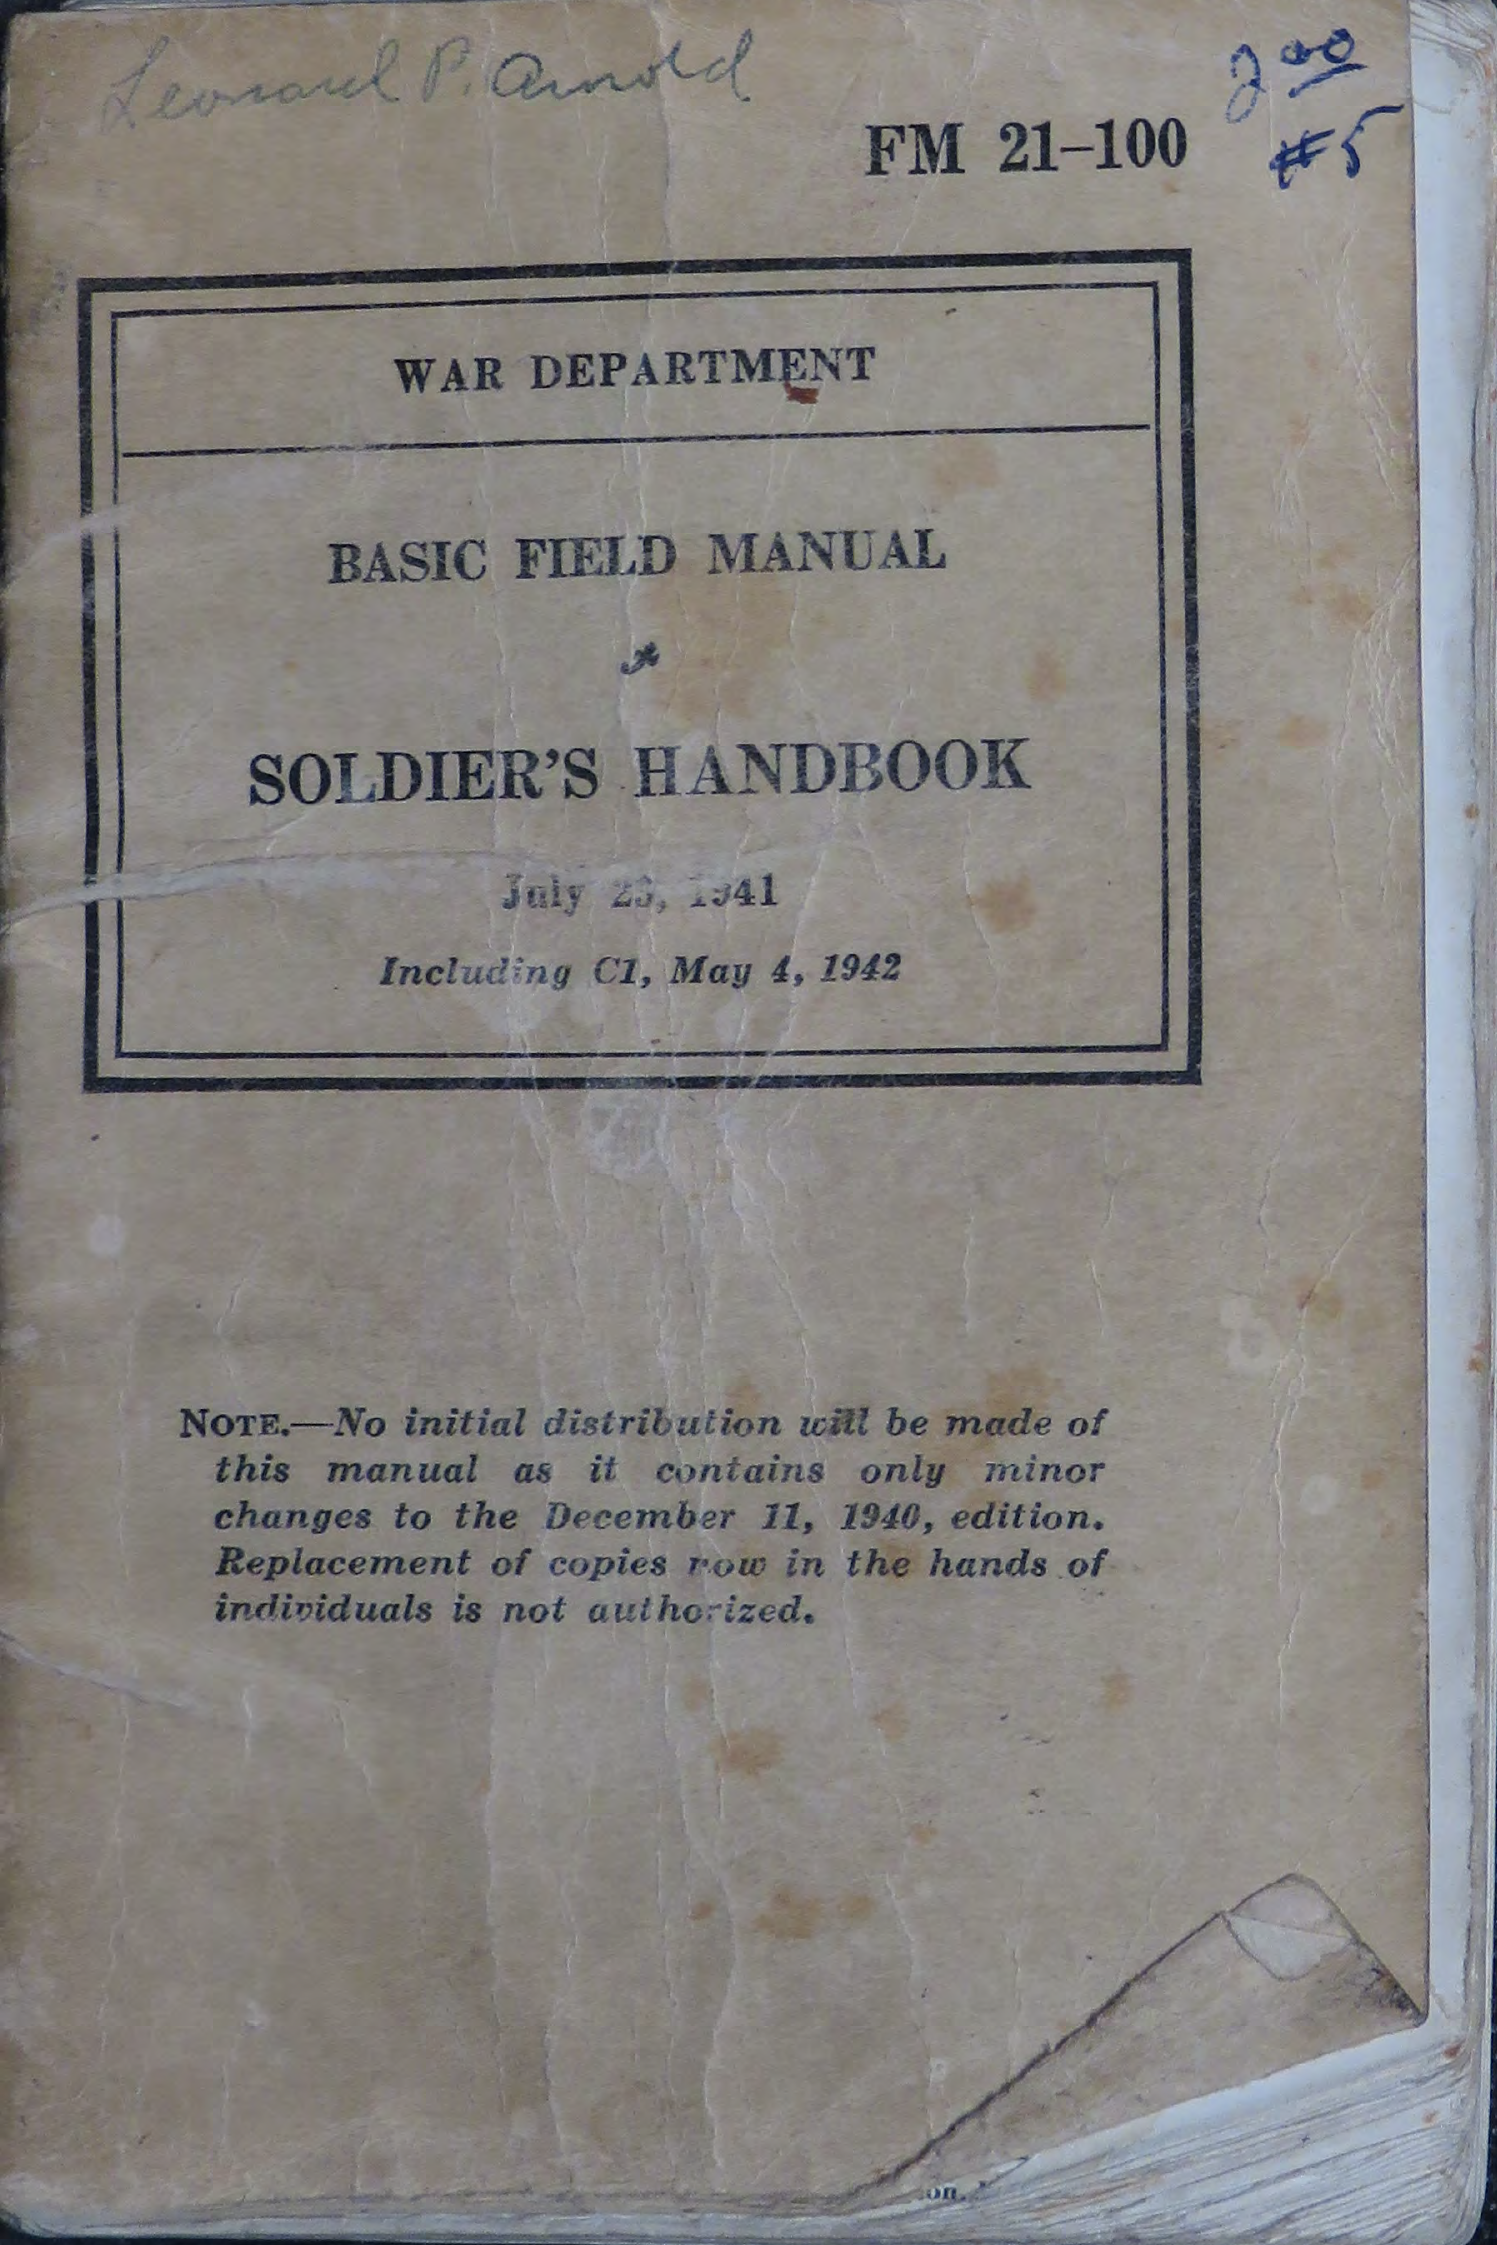 Sample page 1 from AirCorps Library document: Basic Field Manual for Soldier's Handbook